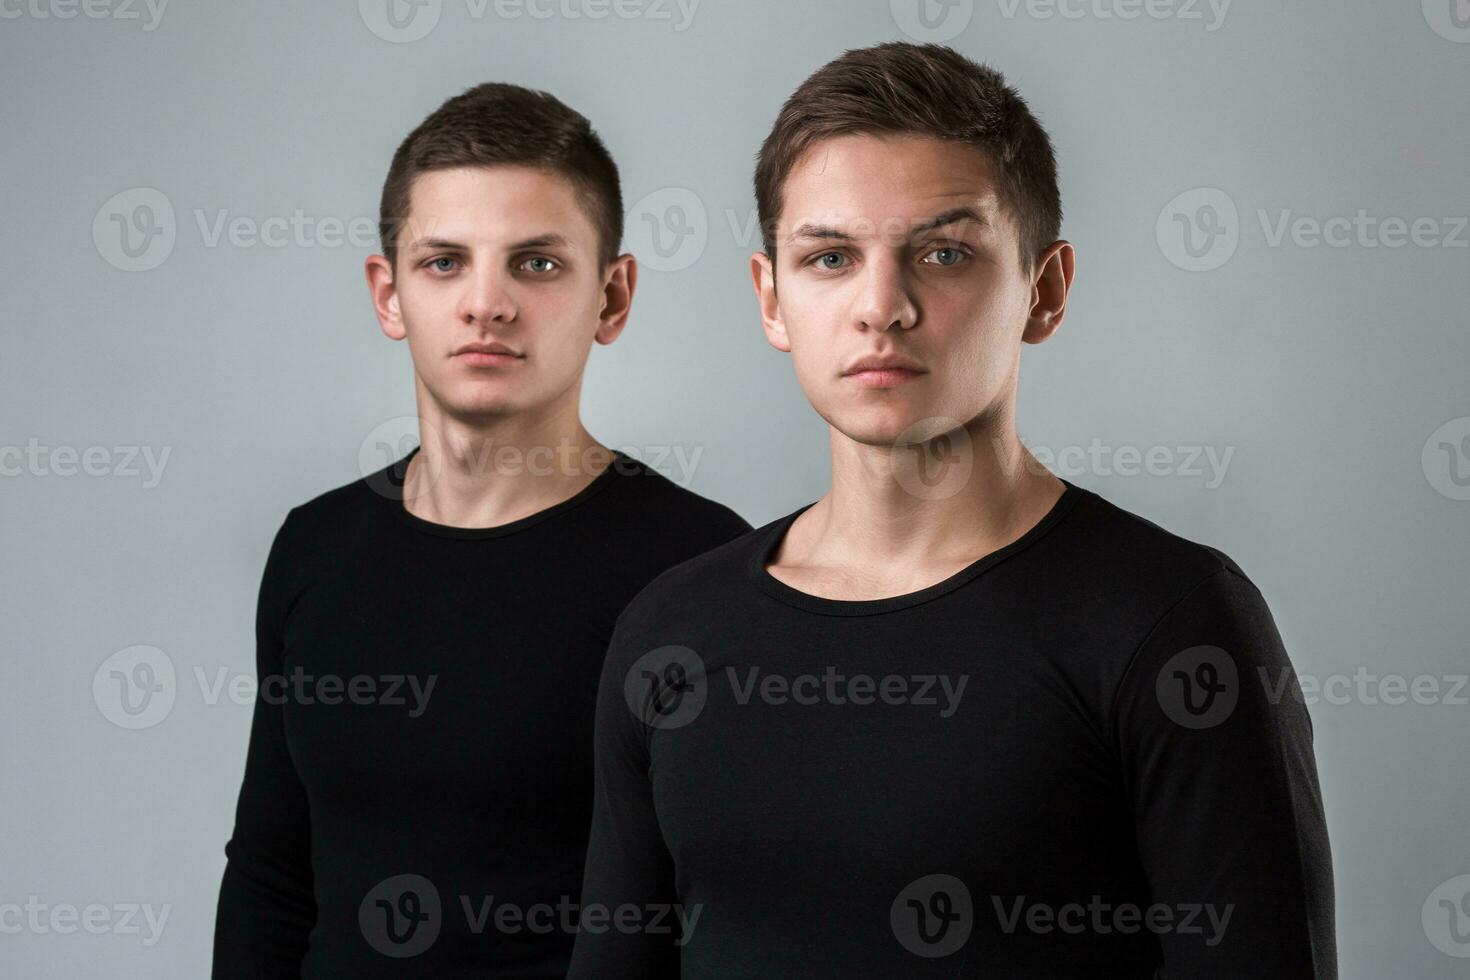 The two twin brother stand on the gray background photo